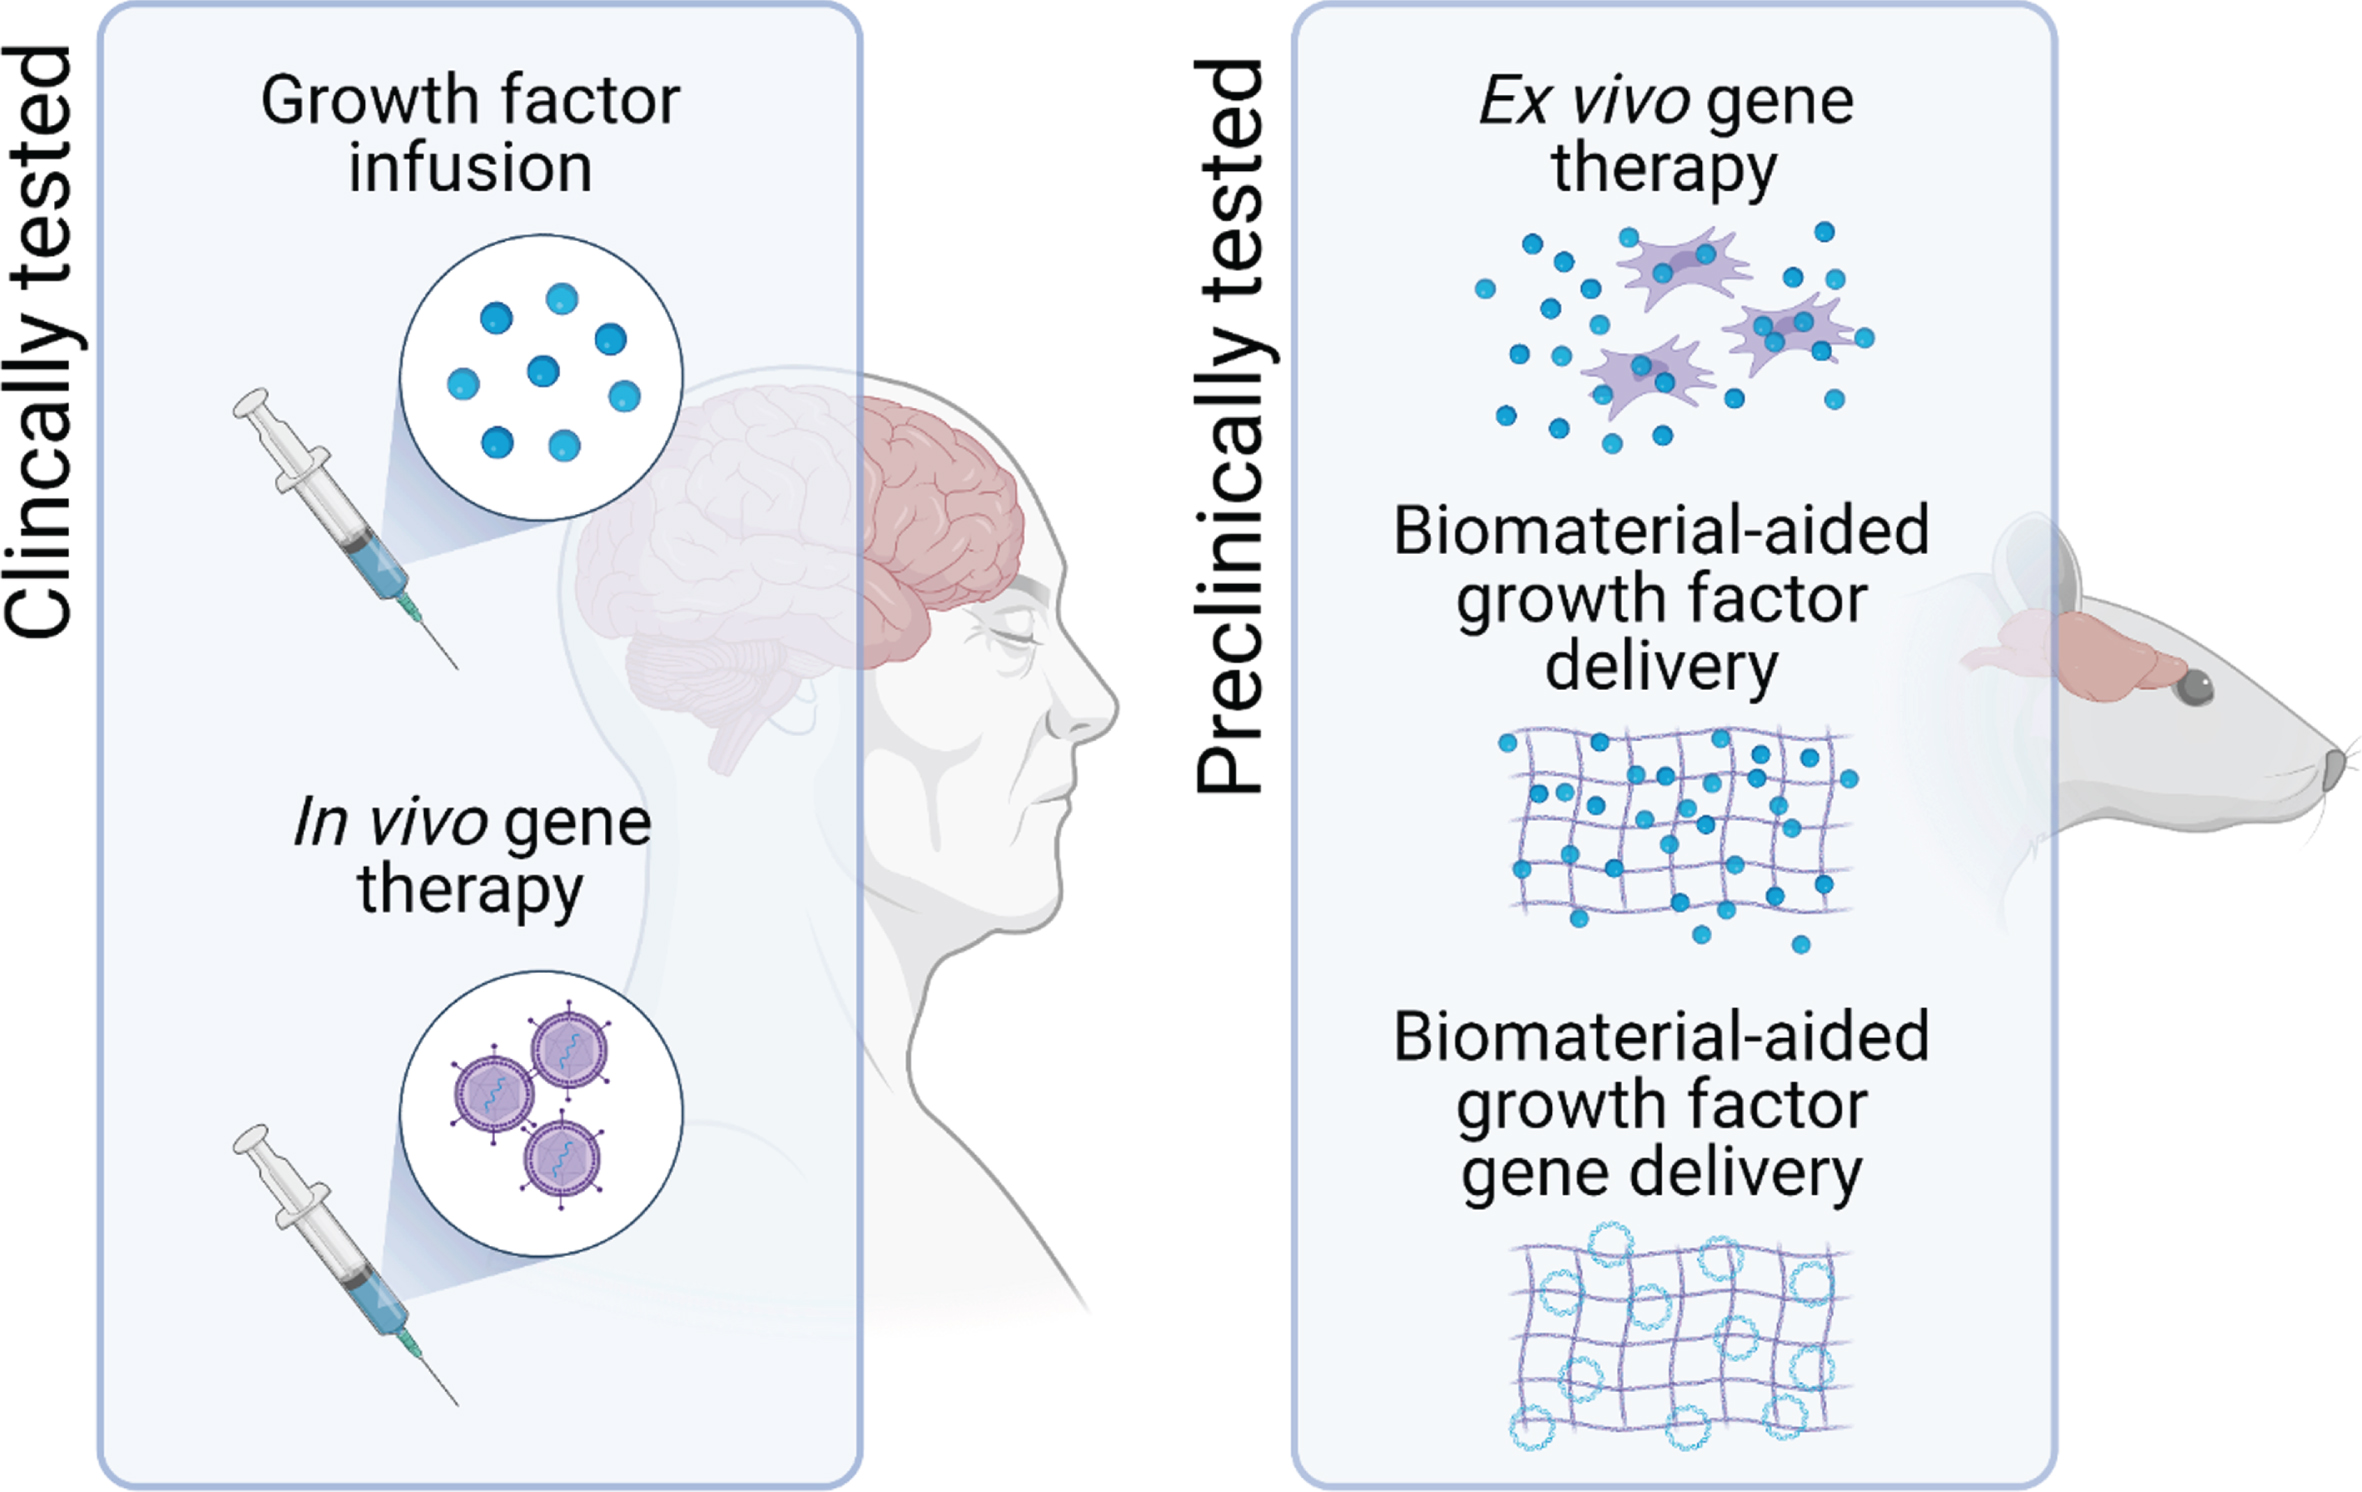 Potential delivery systems for neurotrophic growth factor delivery in PD. To assess the therapeutic potential of neurotrophic factor therapy, direct infusion of the growth factor protein into the target brain region and in vivo gene therapy have progressed to clinical trials in patients with PD. However, one of the major hurdles to the clinical translation of growth factor therapeutics for PD remains issues related to the delivery of these protein drugs. To address this, other delivery systems, including ex vivo gene therapy and biomaterial-aided protein and gene delivery are in preclinical development.